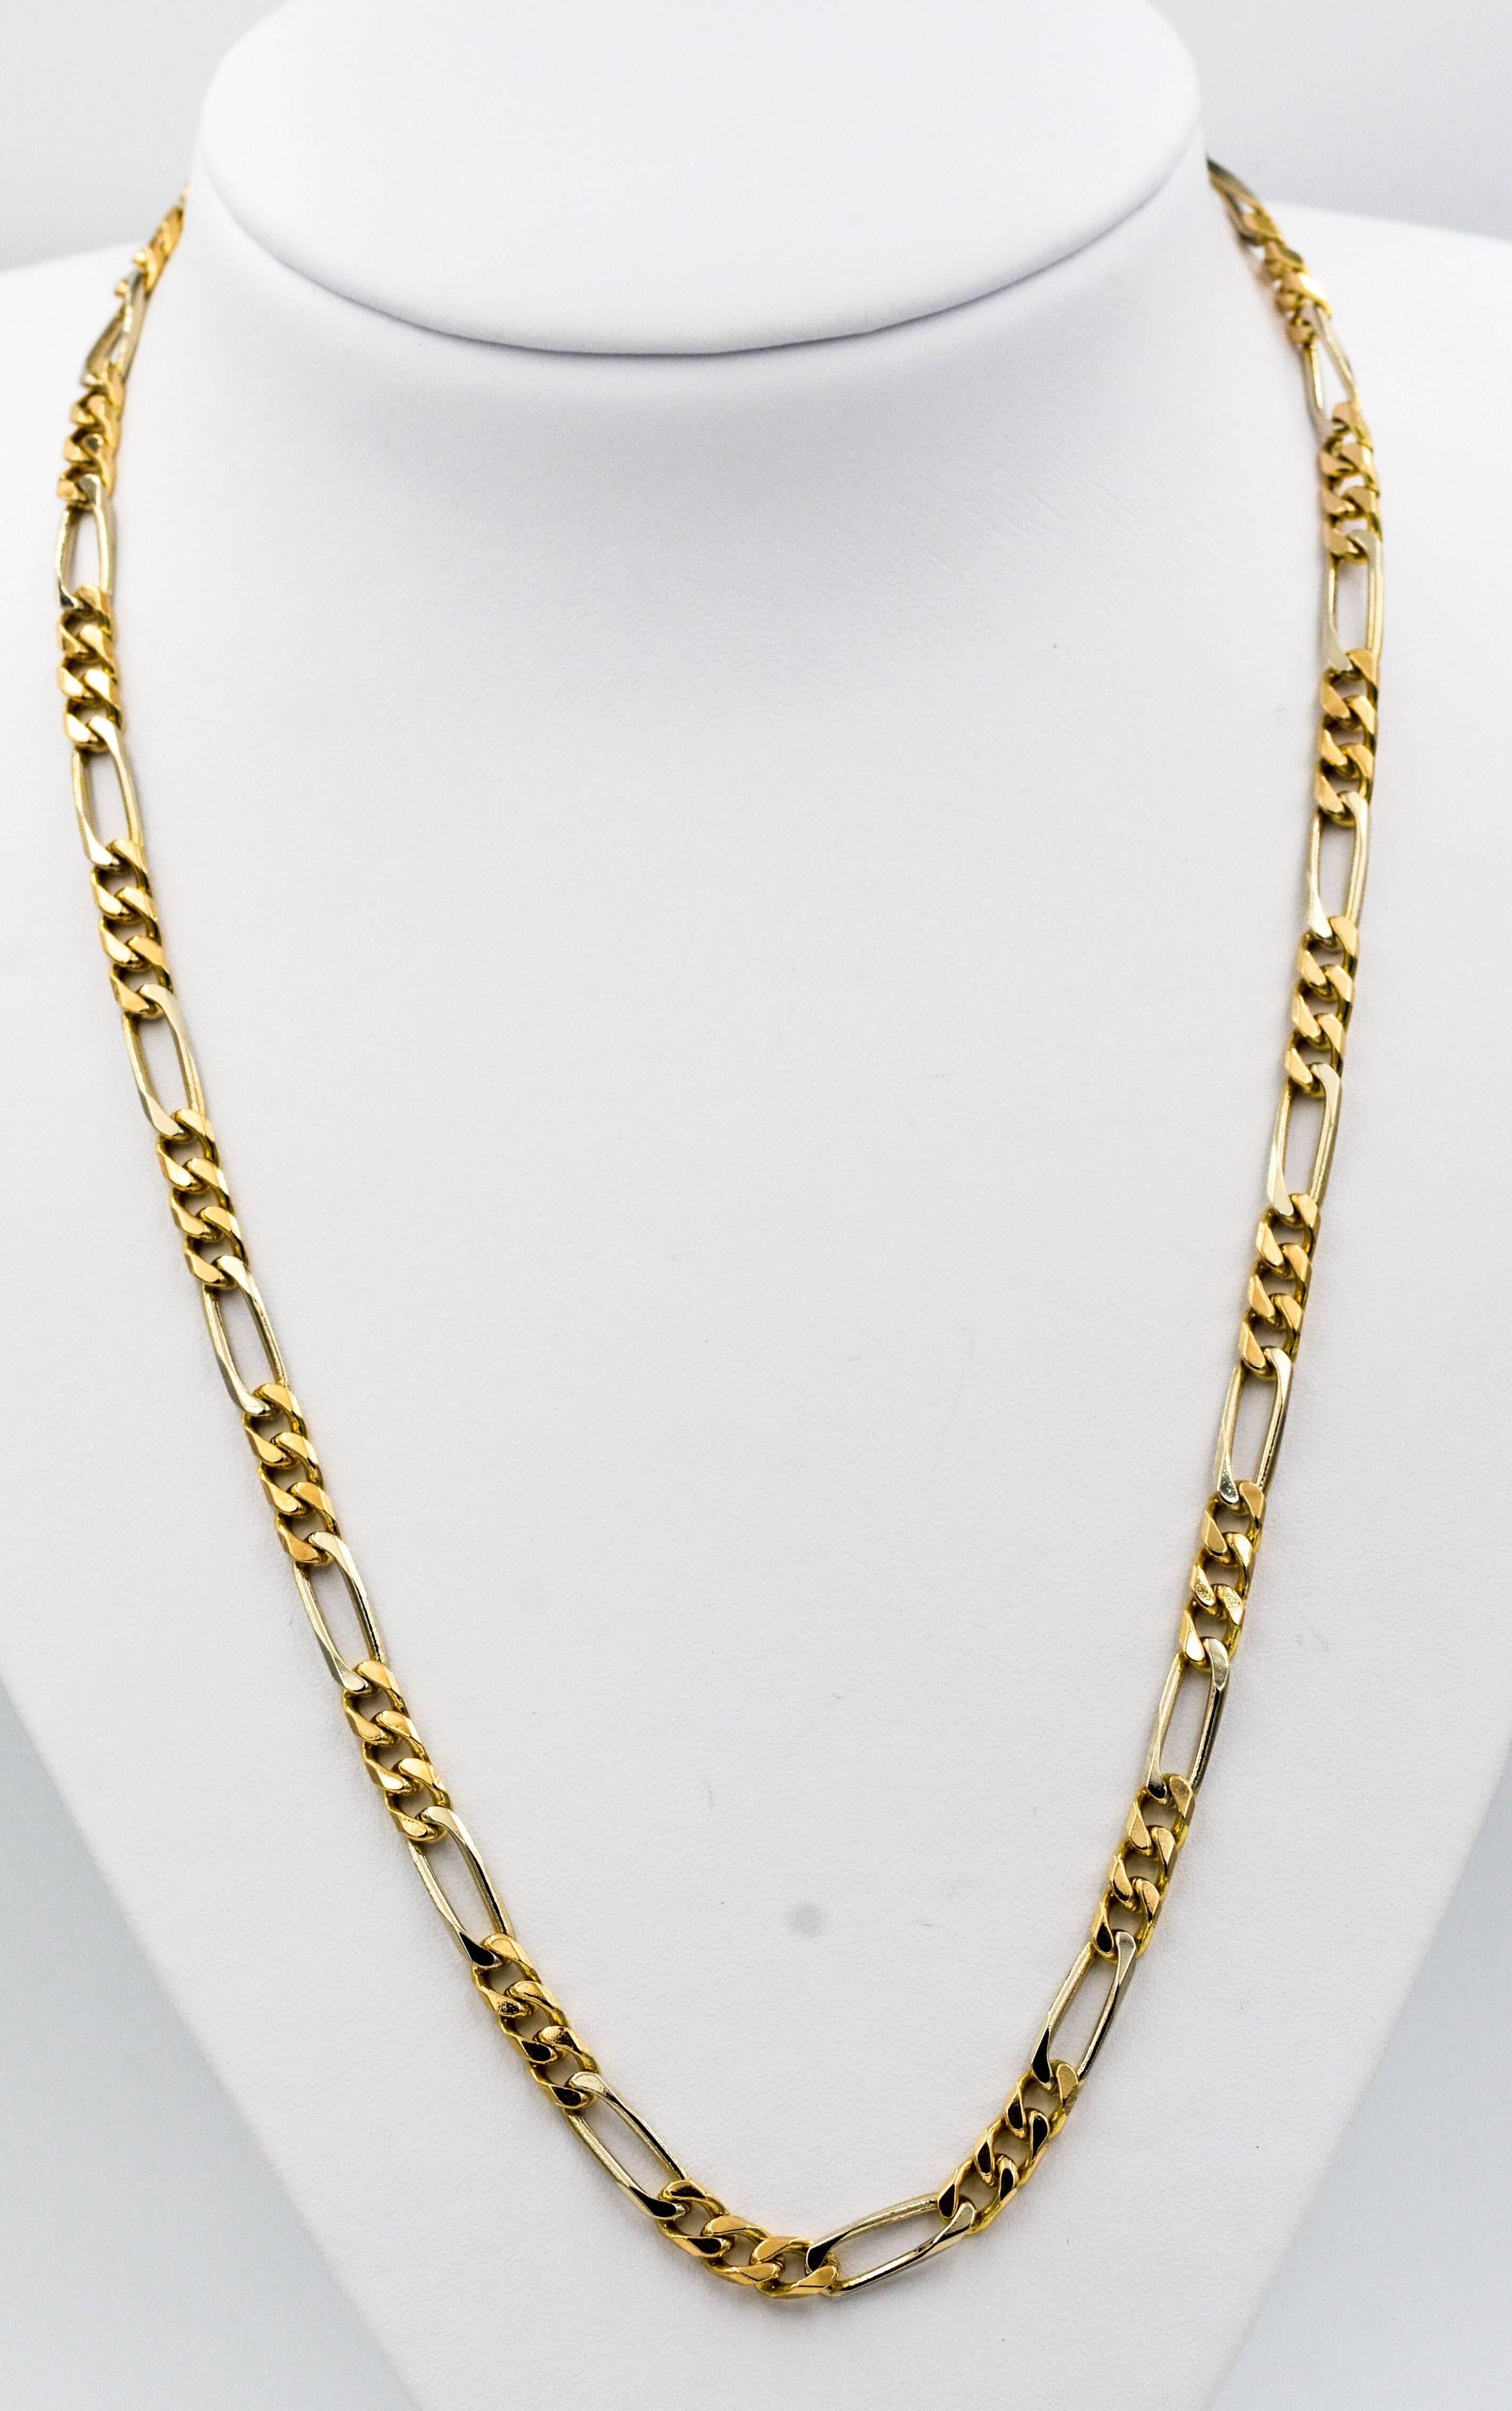 Classic 24 inch Figaro chain necklace in 18kt white and yellow gold links, with lobster claw clasp weighing an impressive 54.3 grams. This substantial Figaro chain has surpassed the Eiseman Jewels standard of quality. 